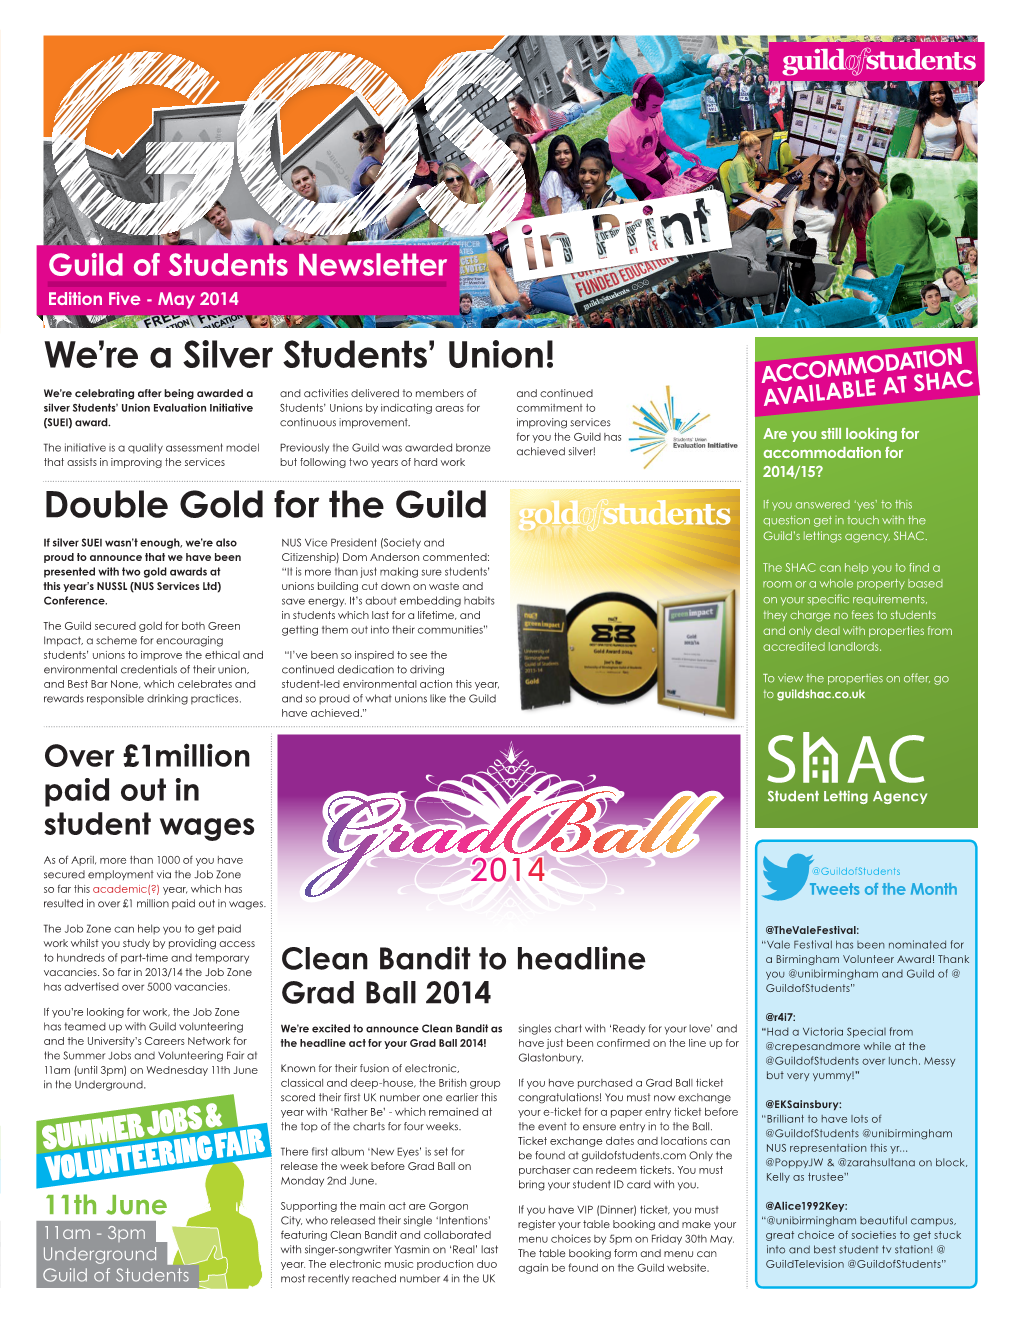 We're a Silver Students' Union!